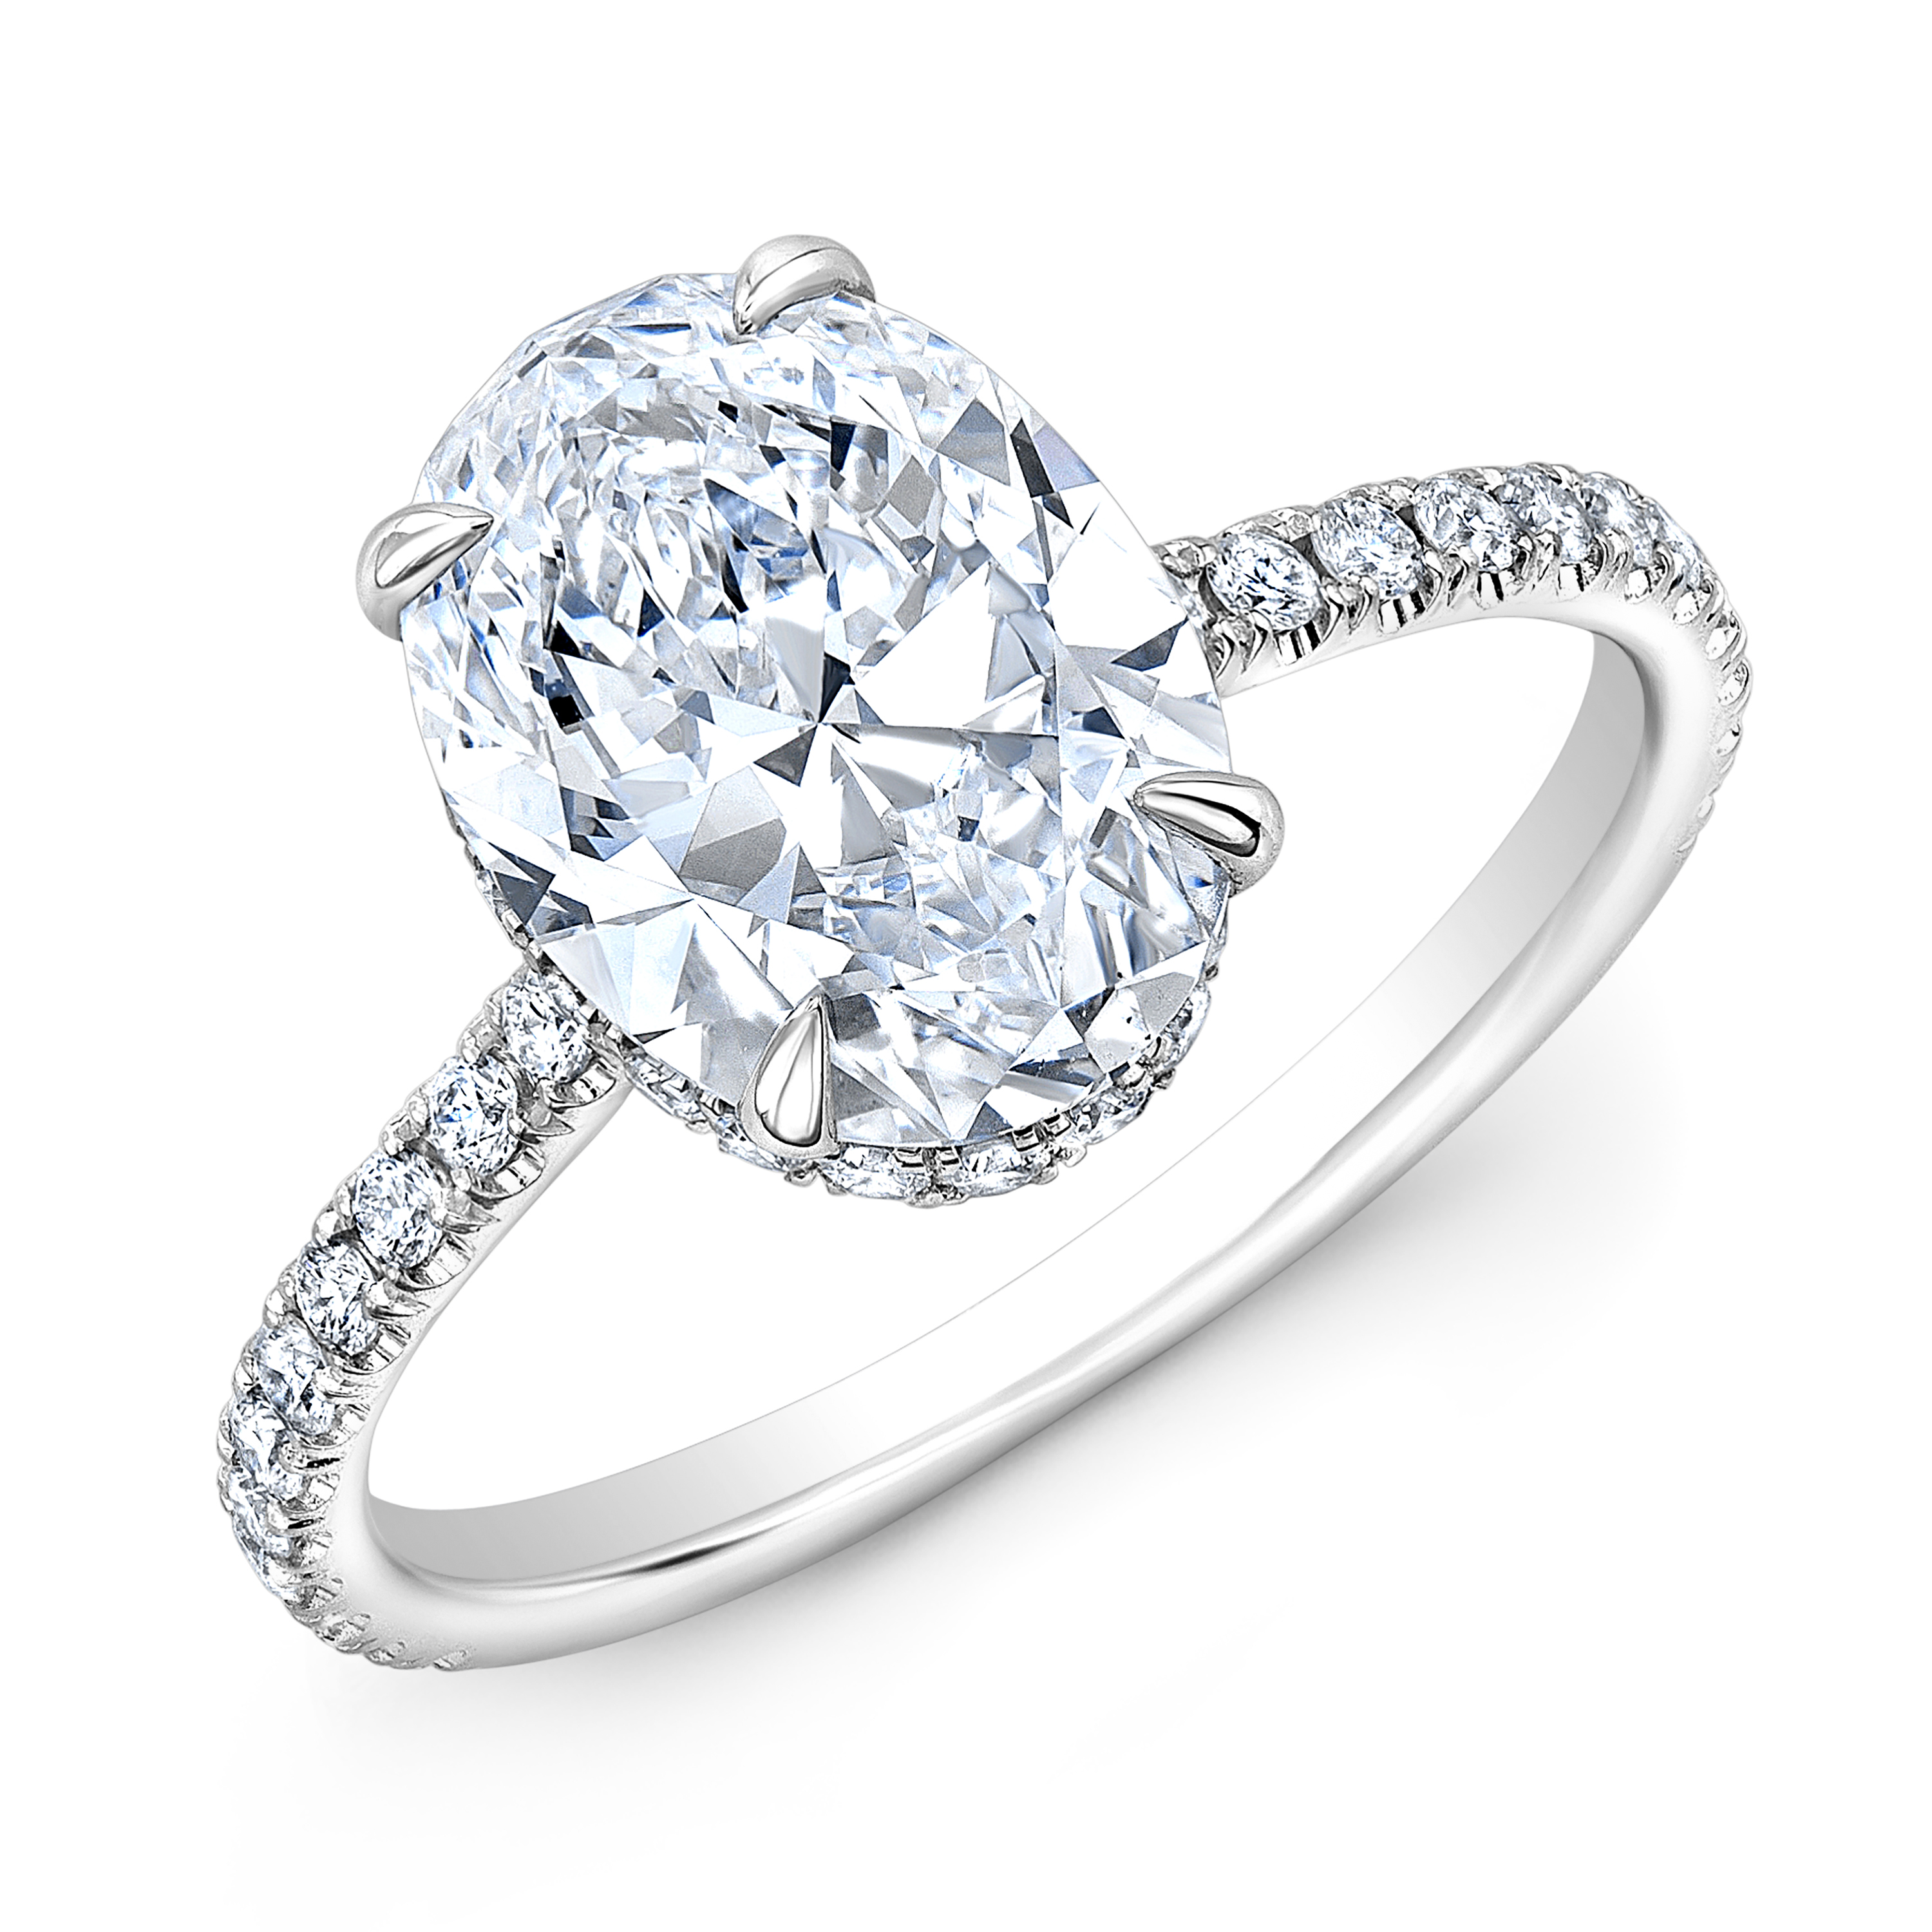 Oval Hidden Halo Engagement Ring in White Gold